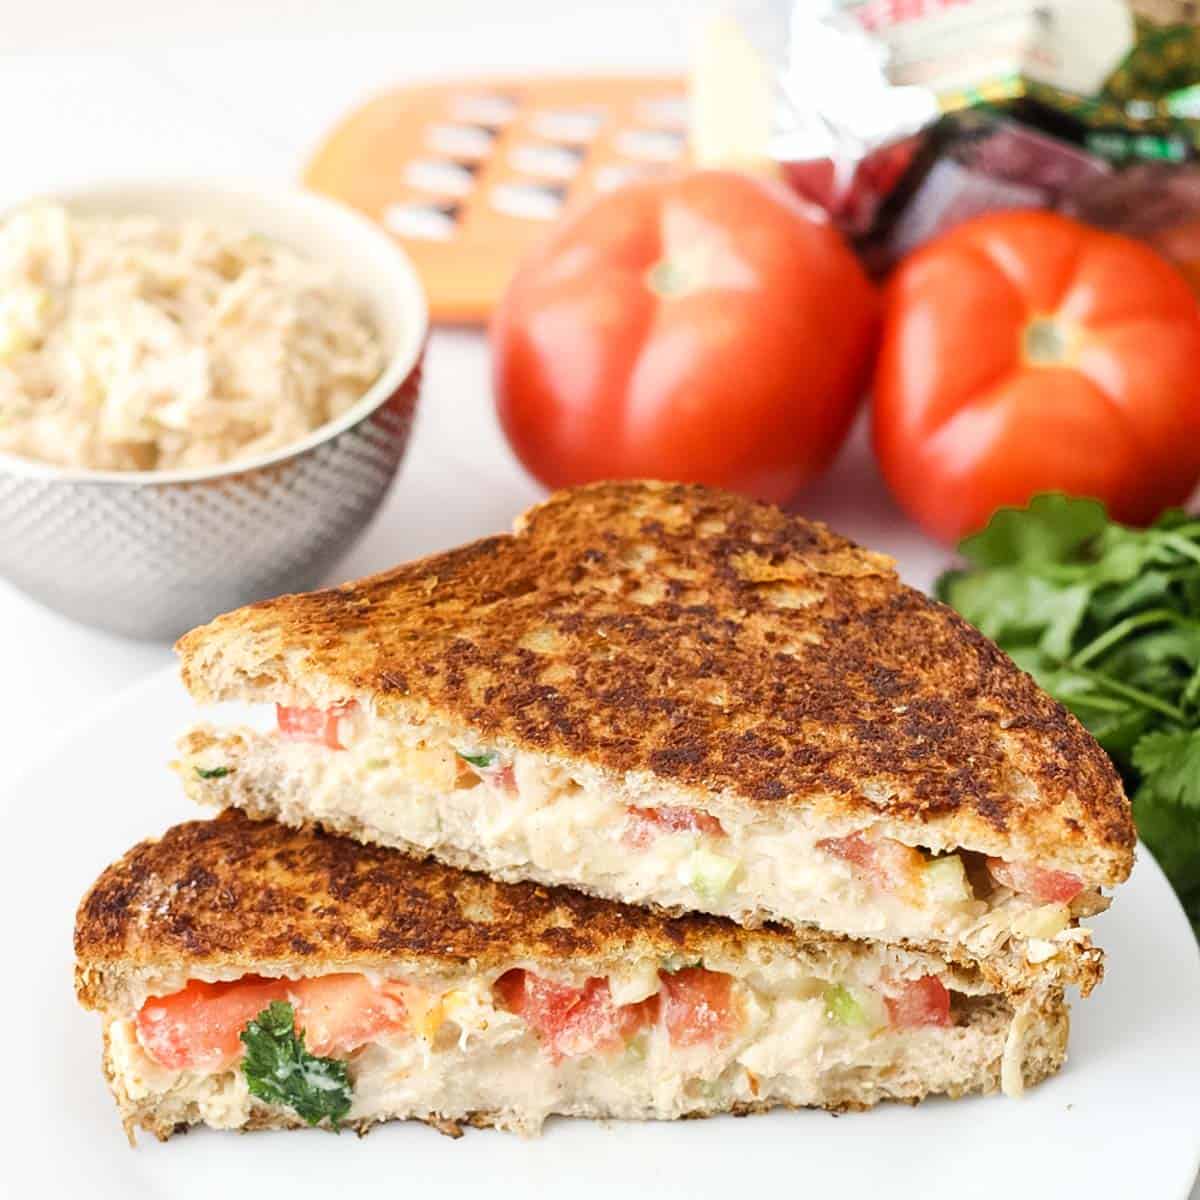 stacked chicken salad melt sandwich surrounded by fresh tomatoes, parsley, and a bowl of chicken salad.